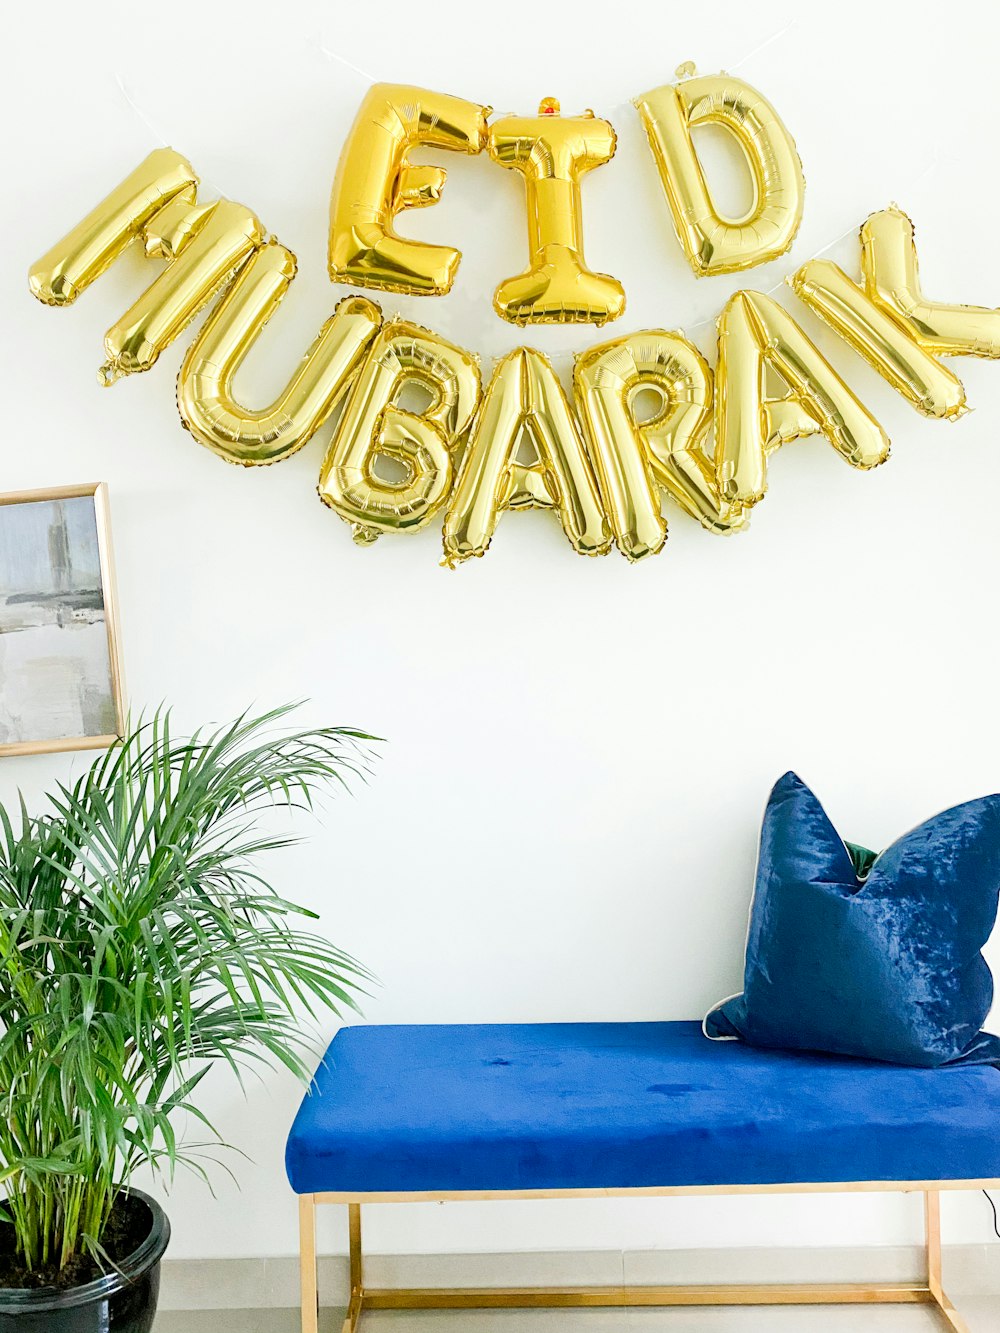 gold dragon figurine on blue couch